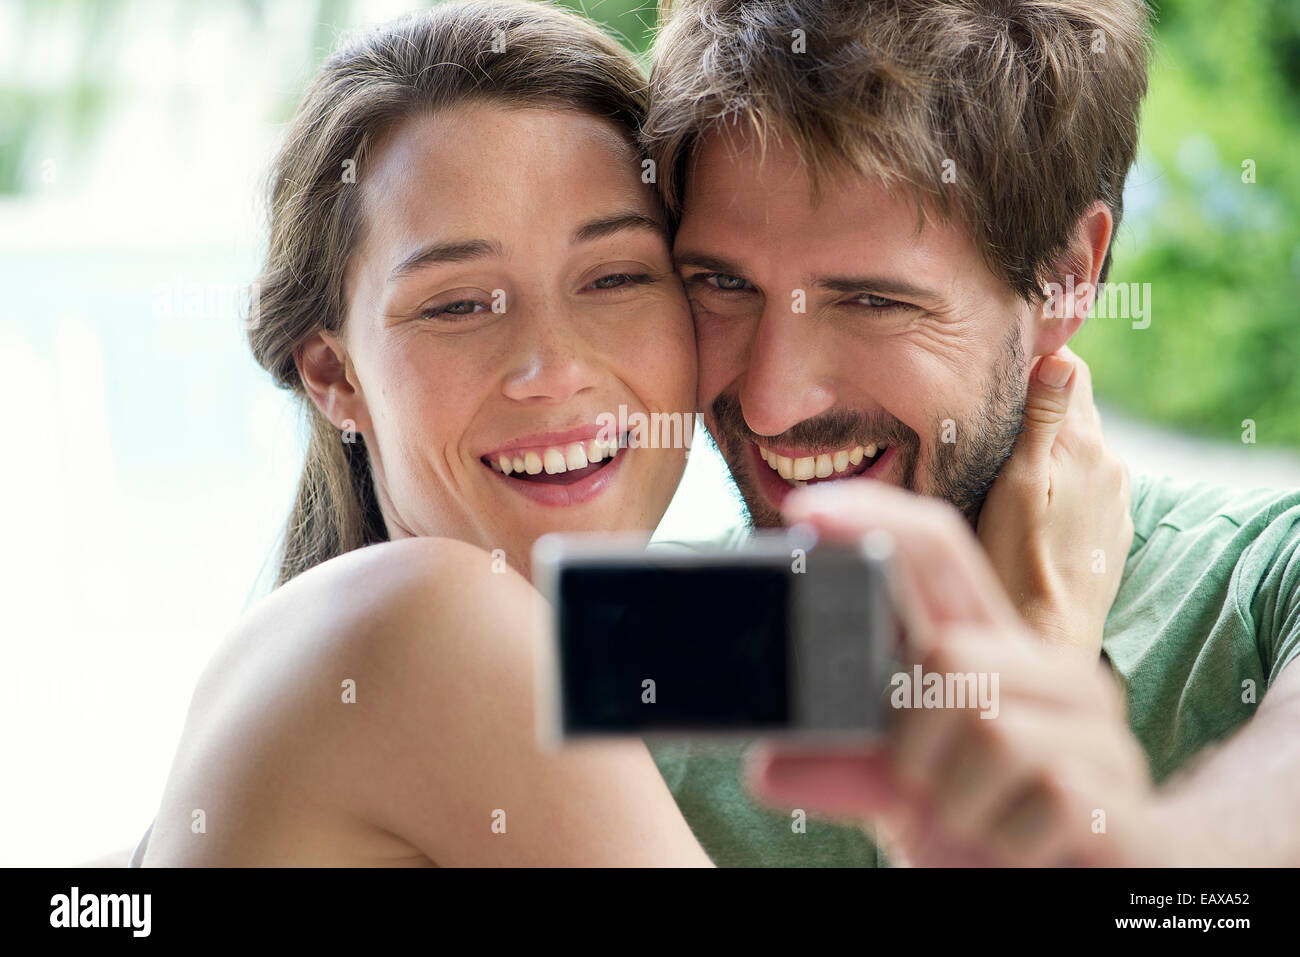 Young couple taking selfie with digital camera Stock Photo